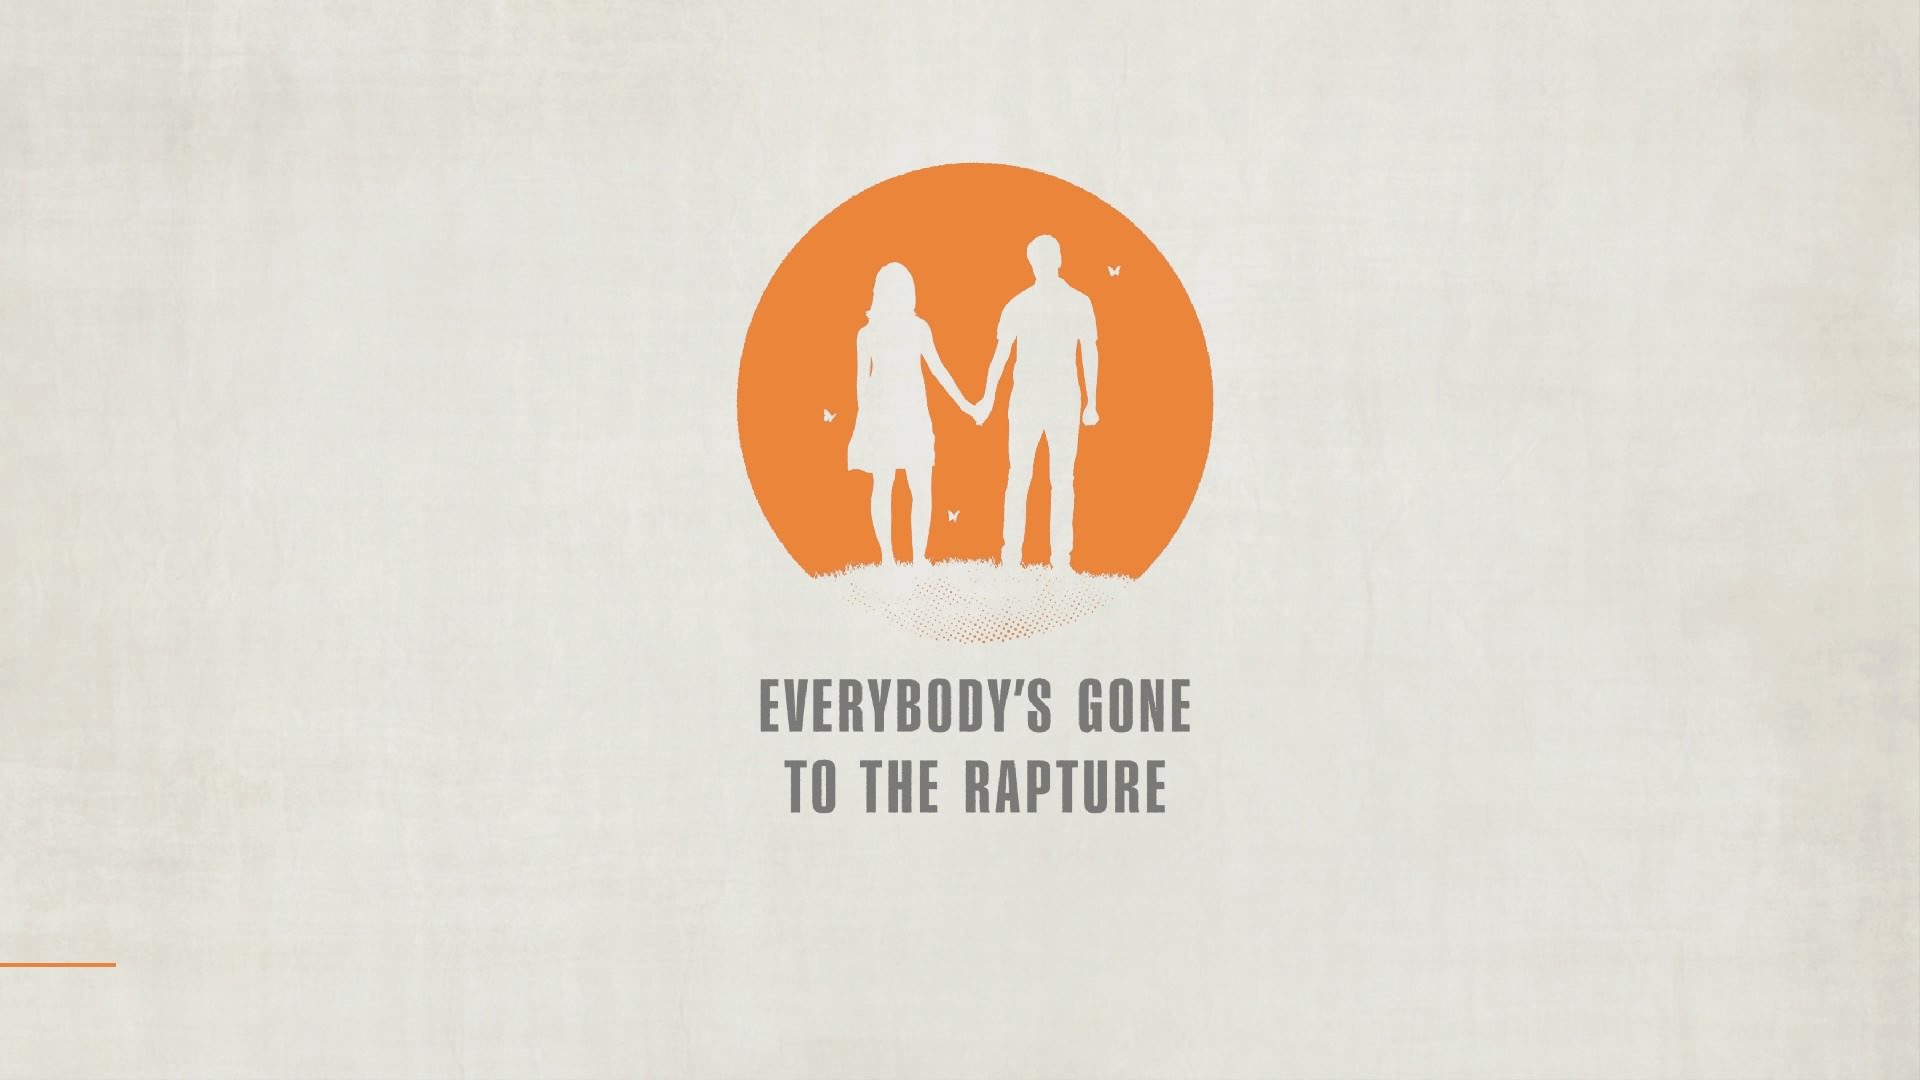 Everybody look for something. Everybody’s gone to the Rapture. Everybody's gone to the Rapture (2015). Everybody's gone to the Rapture логотип. Everybody going to the Rapture.